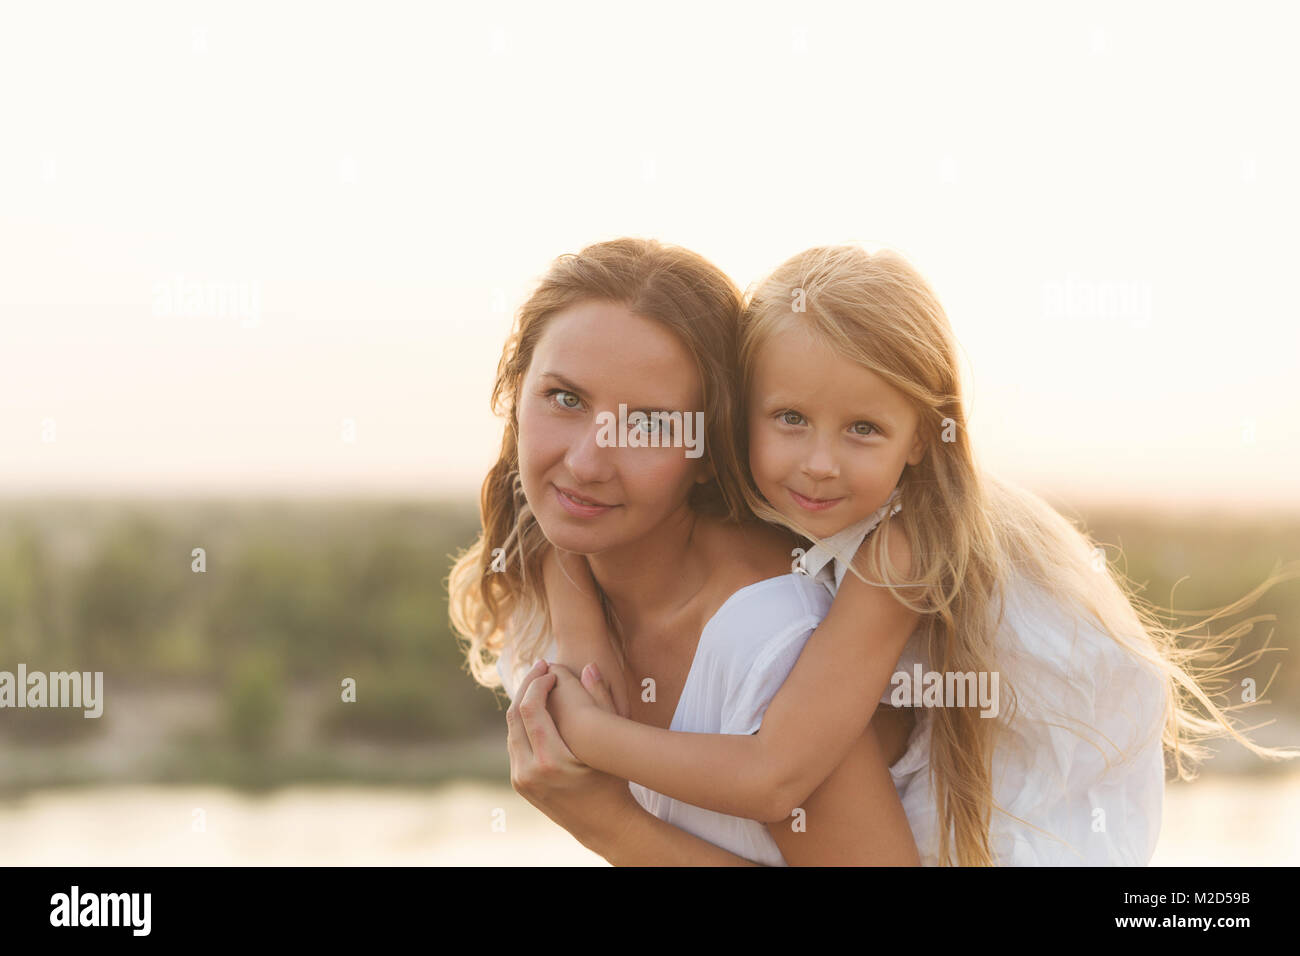 Family, mother and daughter. Girl Piggyback Daughter. Girls in white dresses. They are blondes. Family time together. Stock Photo